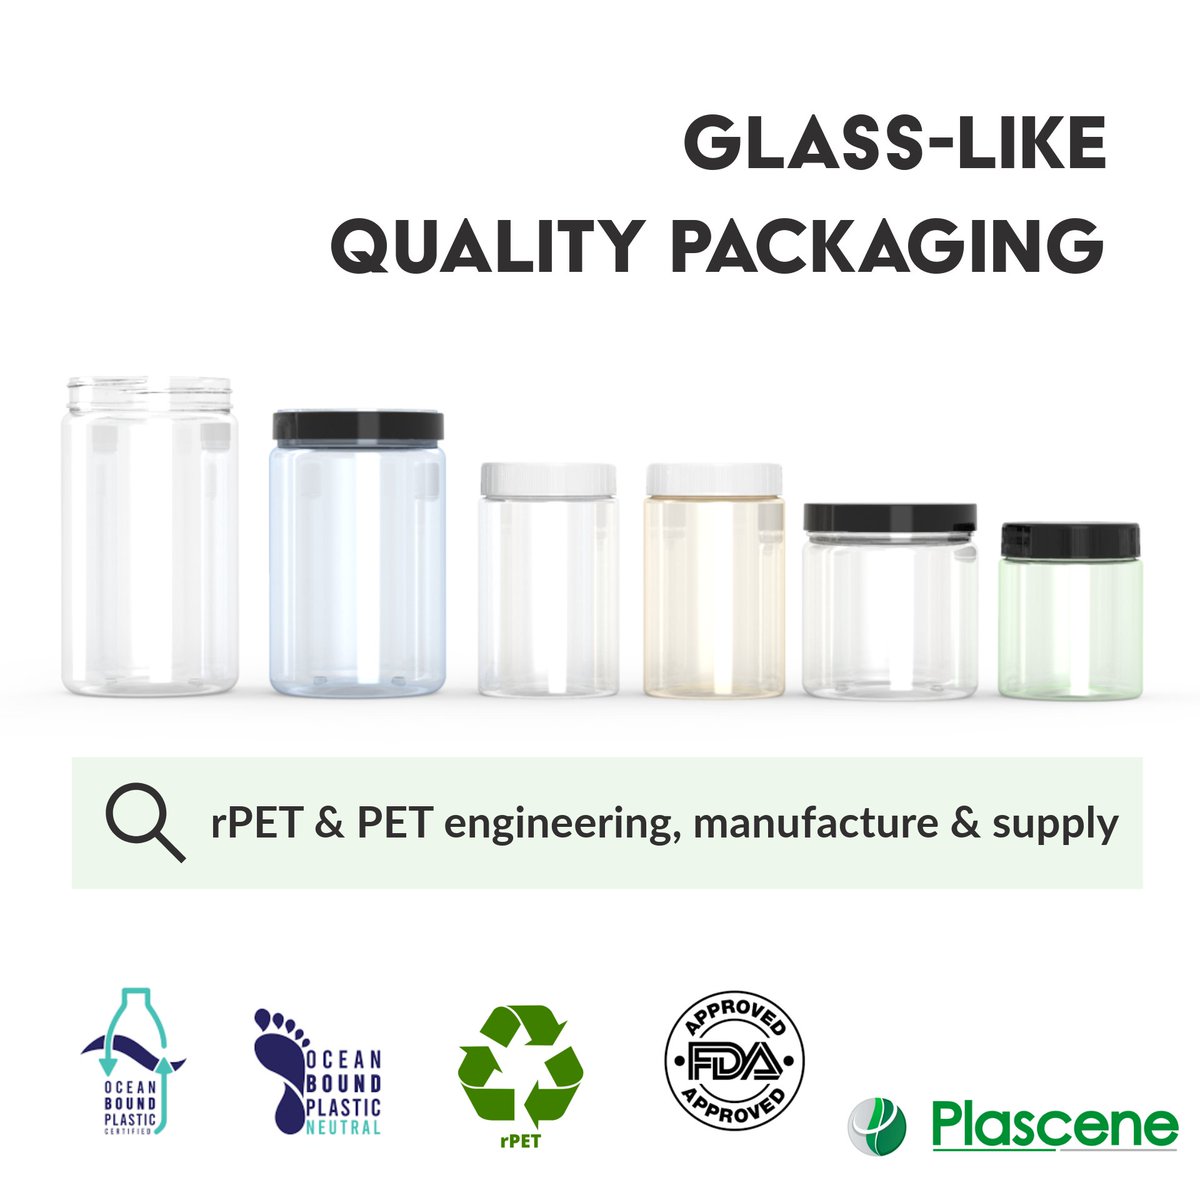 Transparent packaging in both eco-friendly rPET and new PET variations for your product packaging. All our items are FDA-approved and we offer personalized design options to fit what you're looking for. #Packaging #SustainablePackaging #Plascene 🫙bit.ly/3cJ2Q96